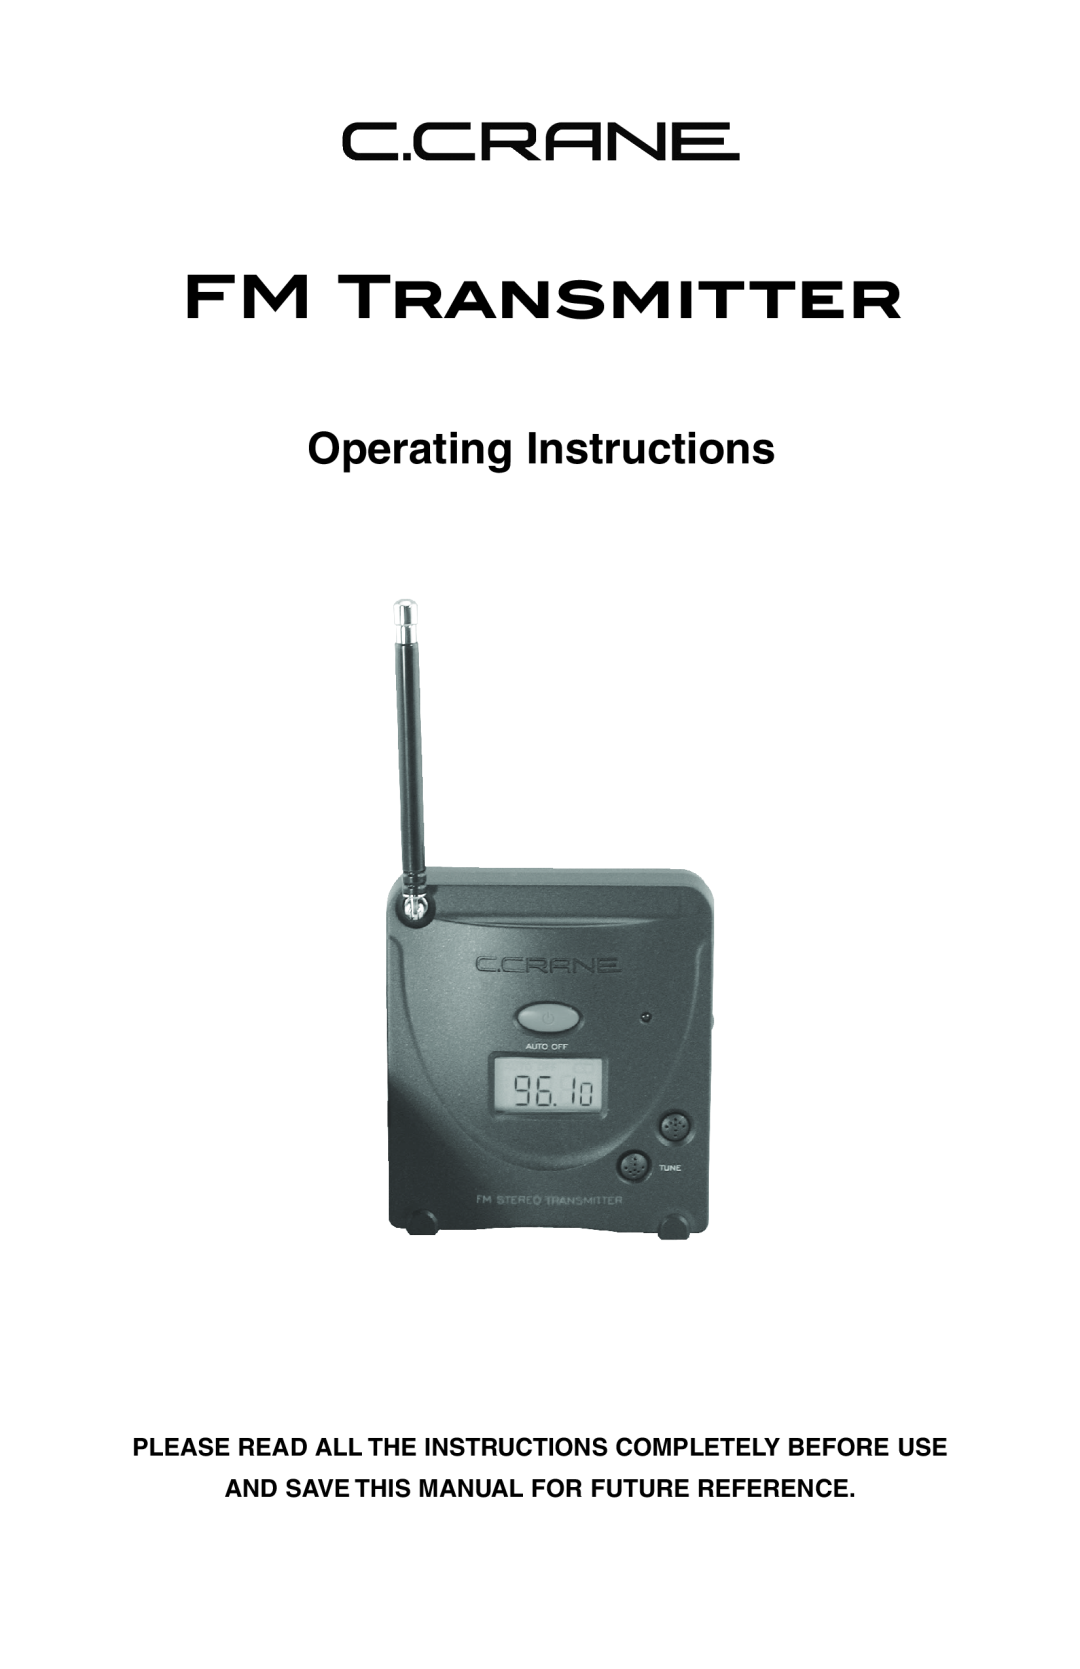 C. Crane Satellite Radio manual FM Transmitter, Operating Instructions, And Save This Manual For Future Reference 